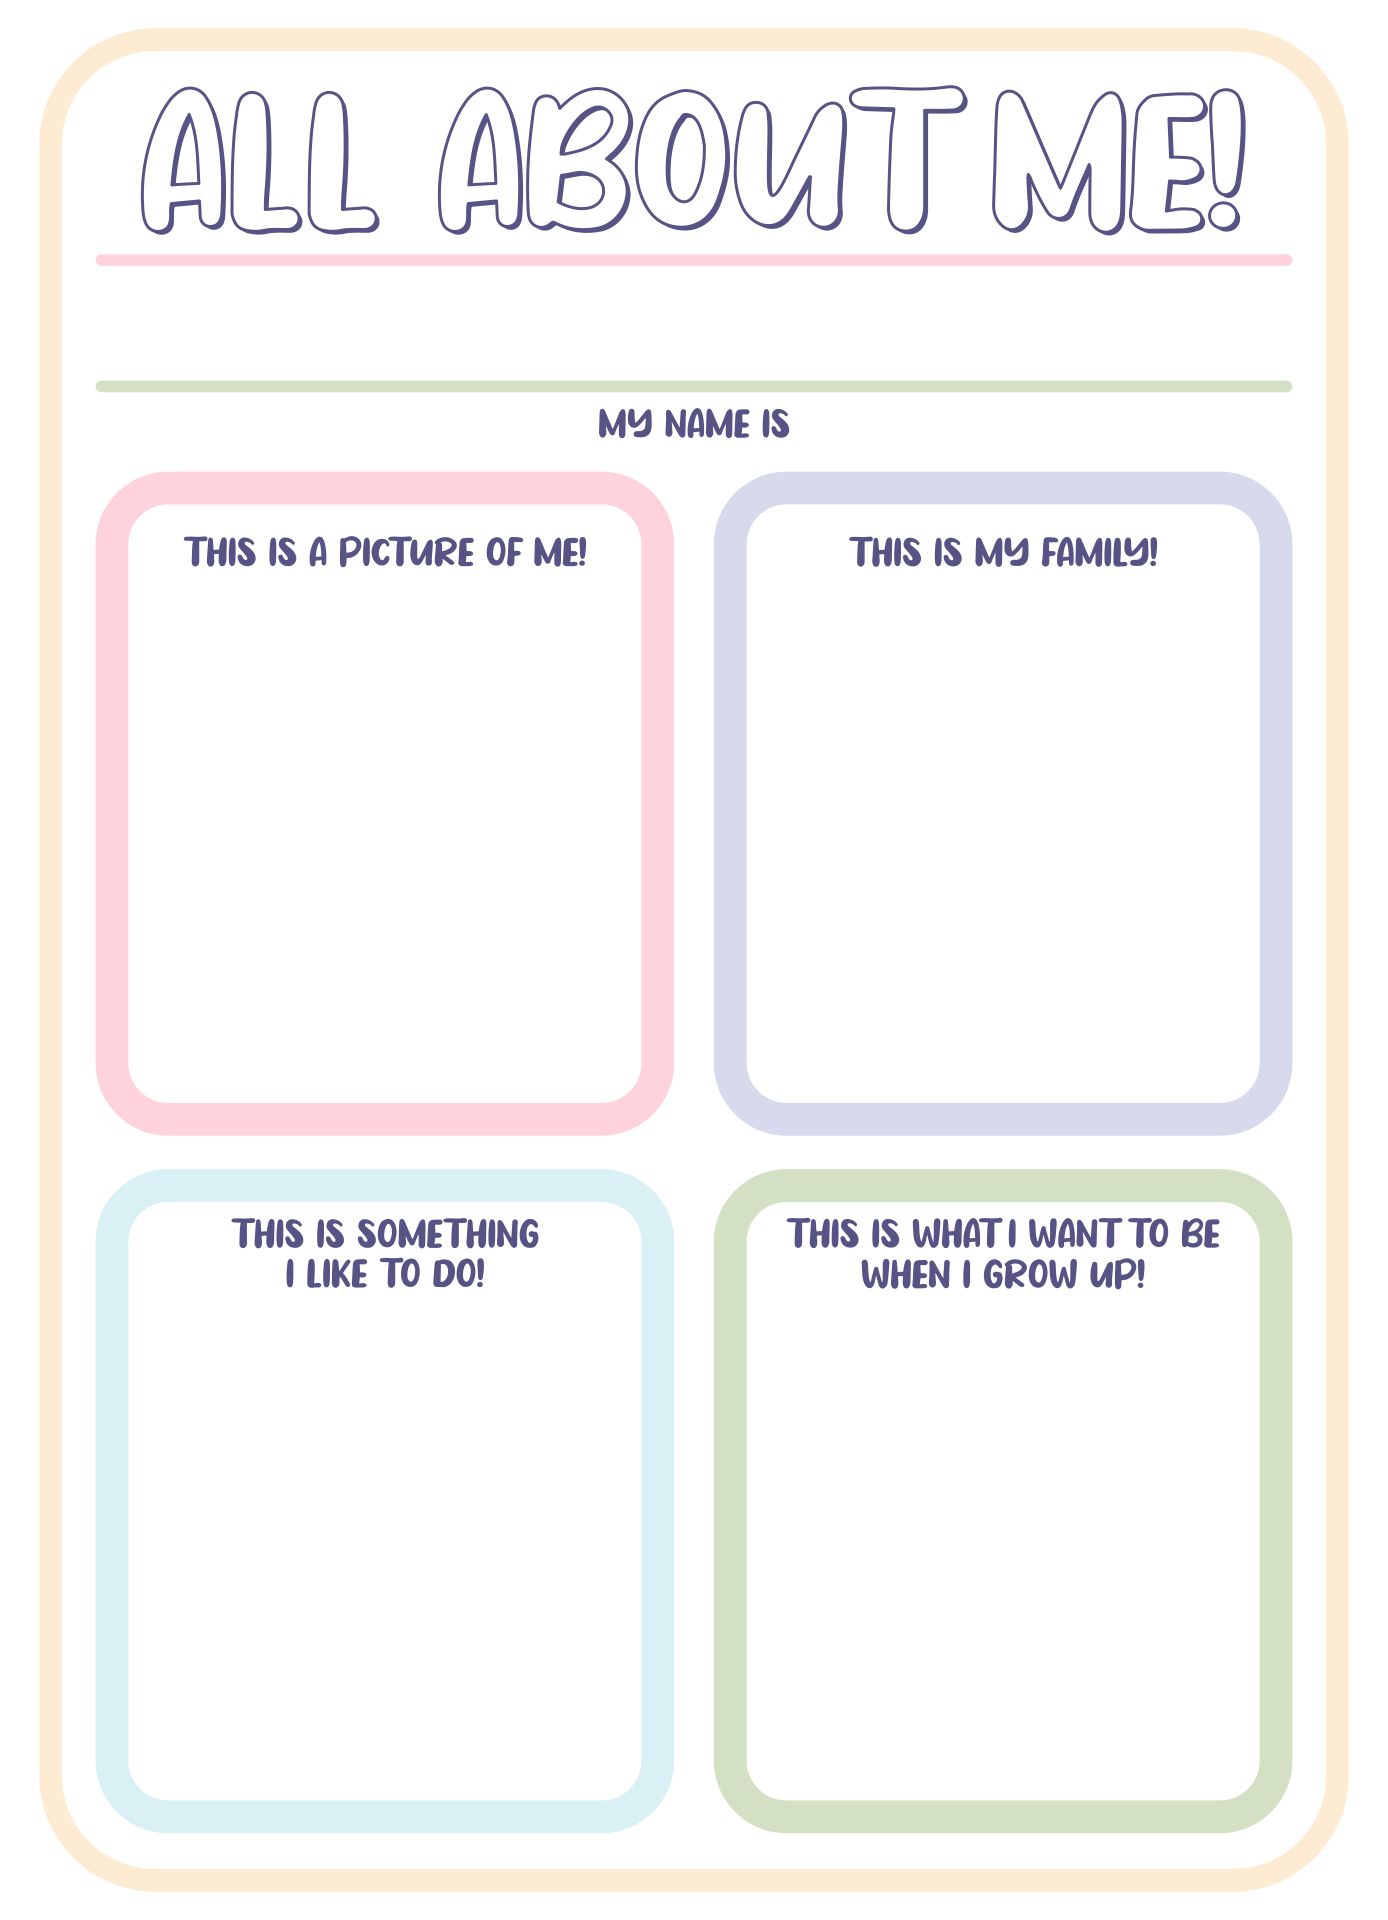 All About Me Preschool Worksheets Free